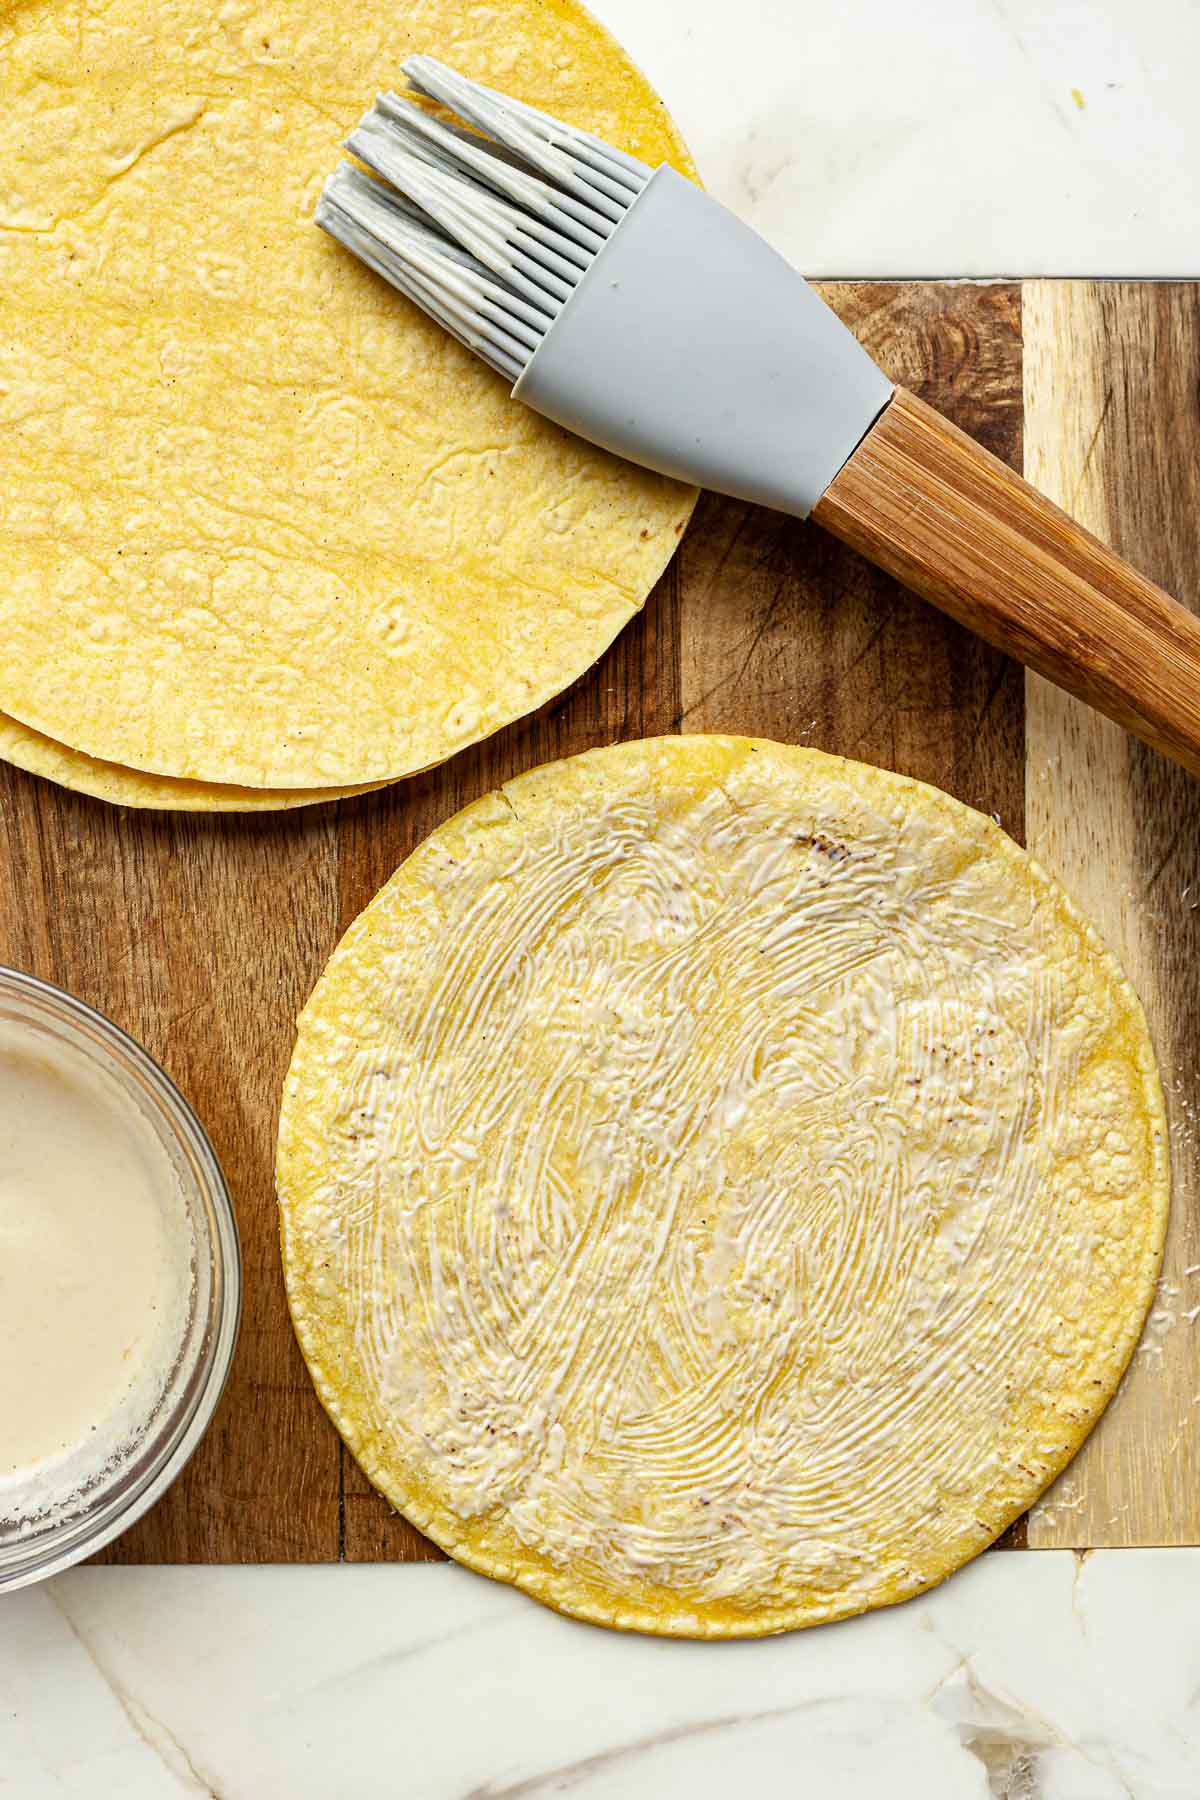 Tahini mixture being brushed on the other side of a tortilla with a stack of tortillas in the background.